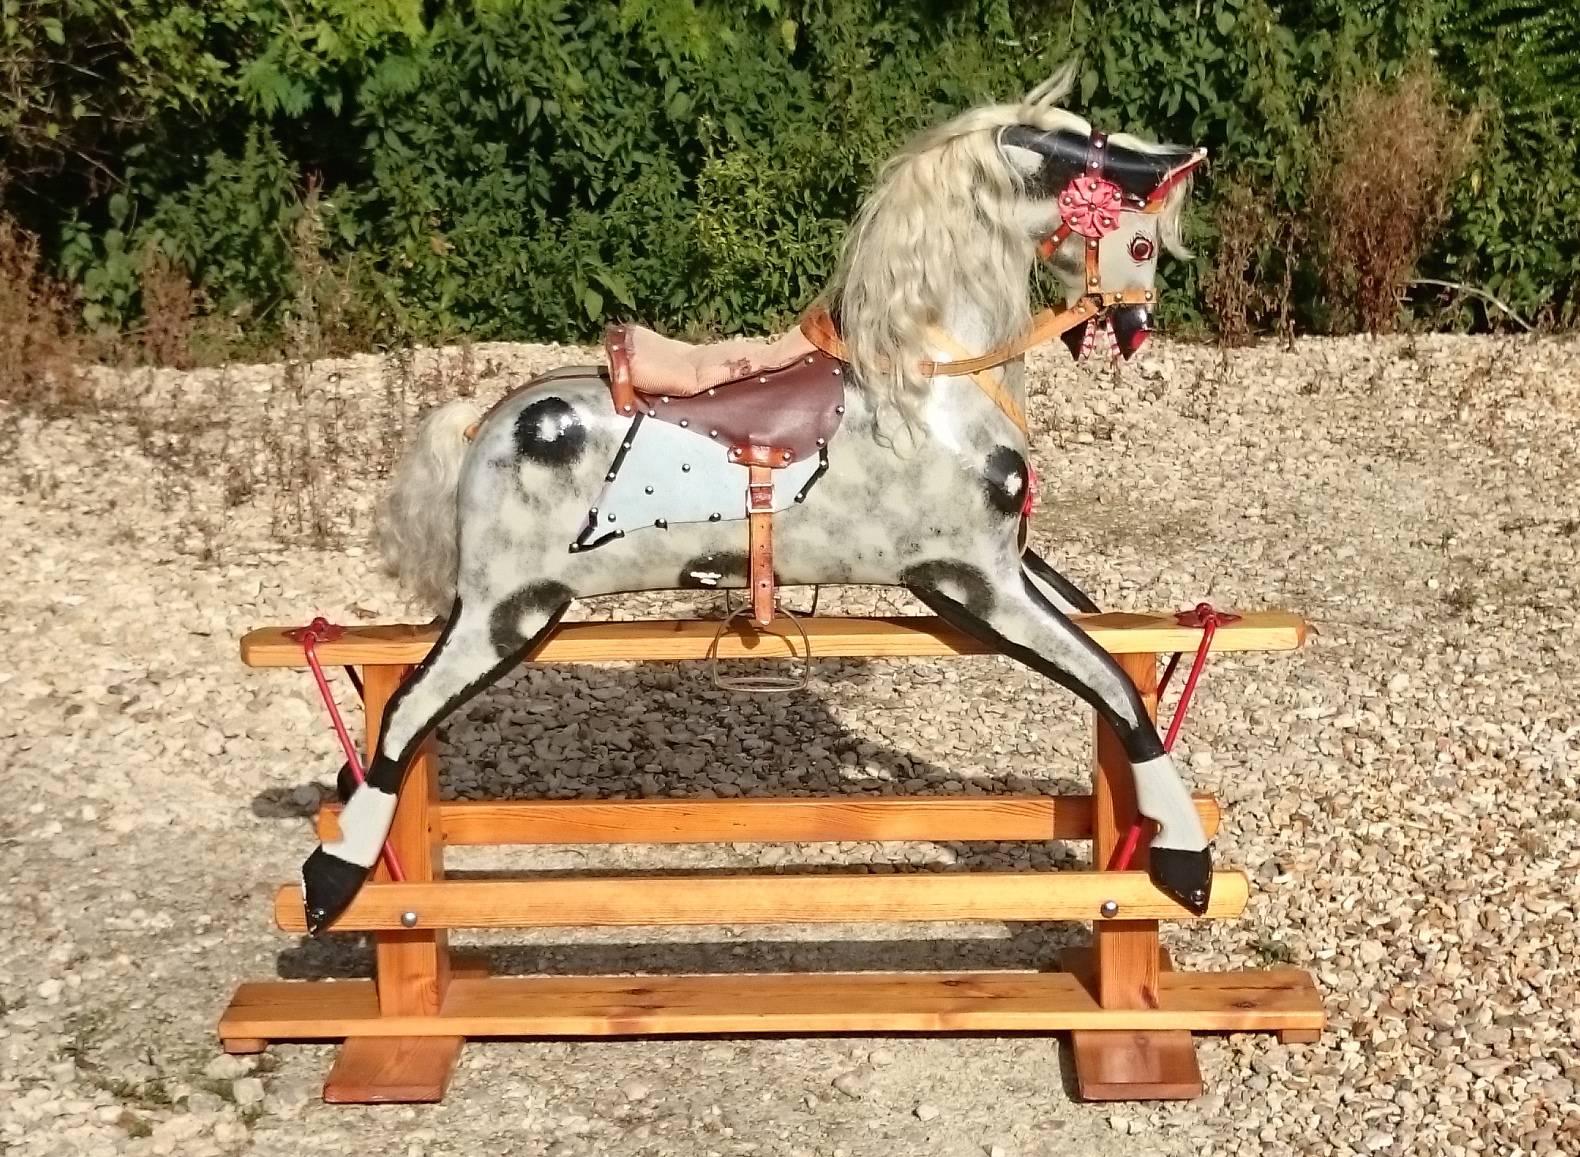 Handmade rocking horse in the 19th century manner.
Made in the UK by Collinson of Liverpool and originally bought in Harrods.

English 1986.

Measures: 46 cm / 18